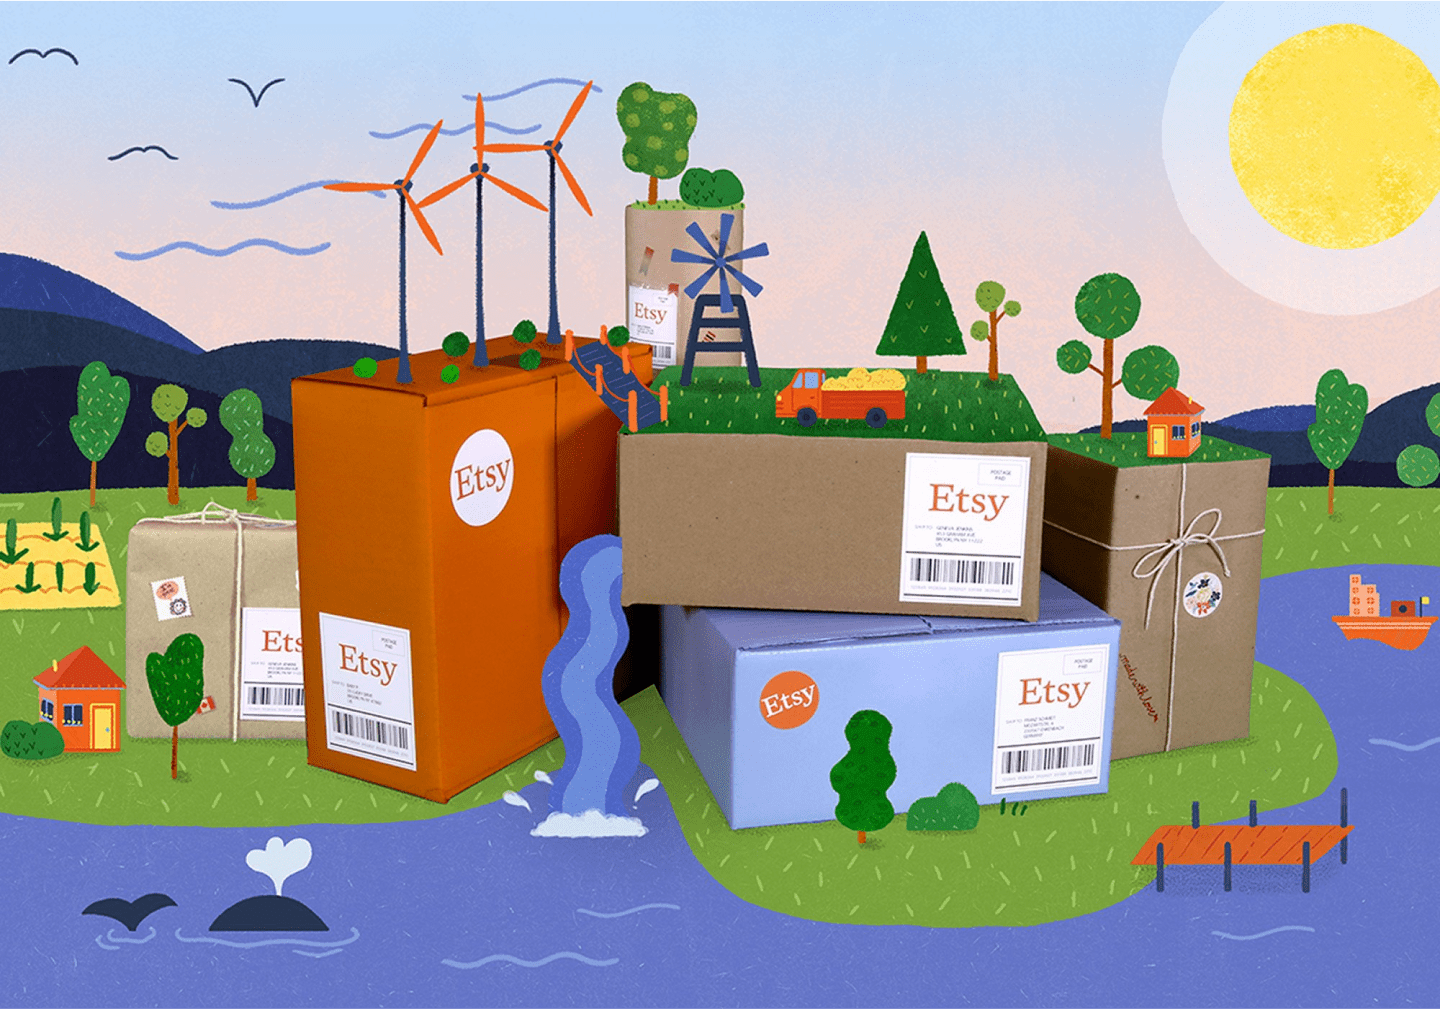 Etsy packages are shown in a sustainable world – surrounded by wind turbines and nature